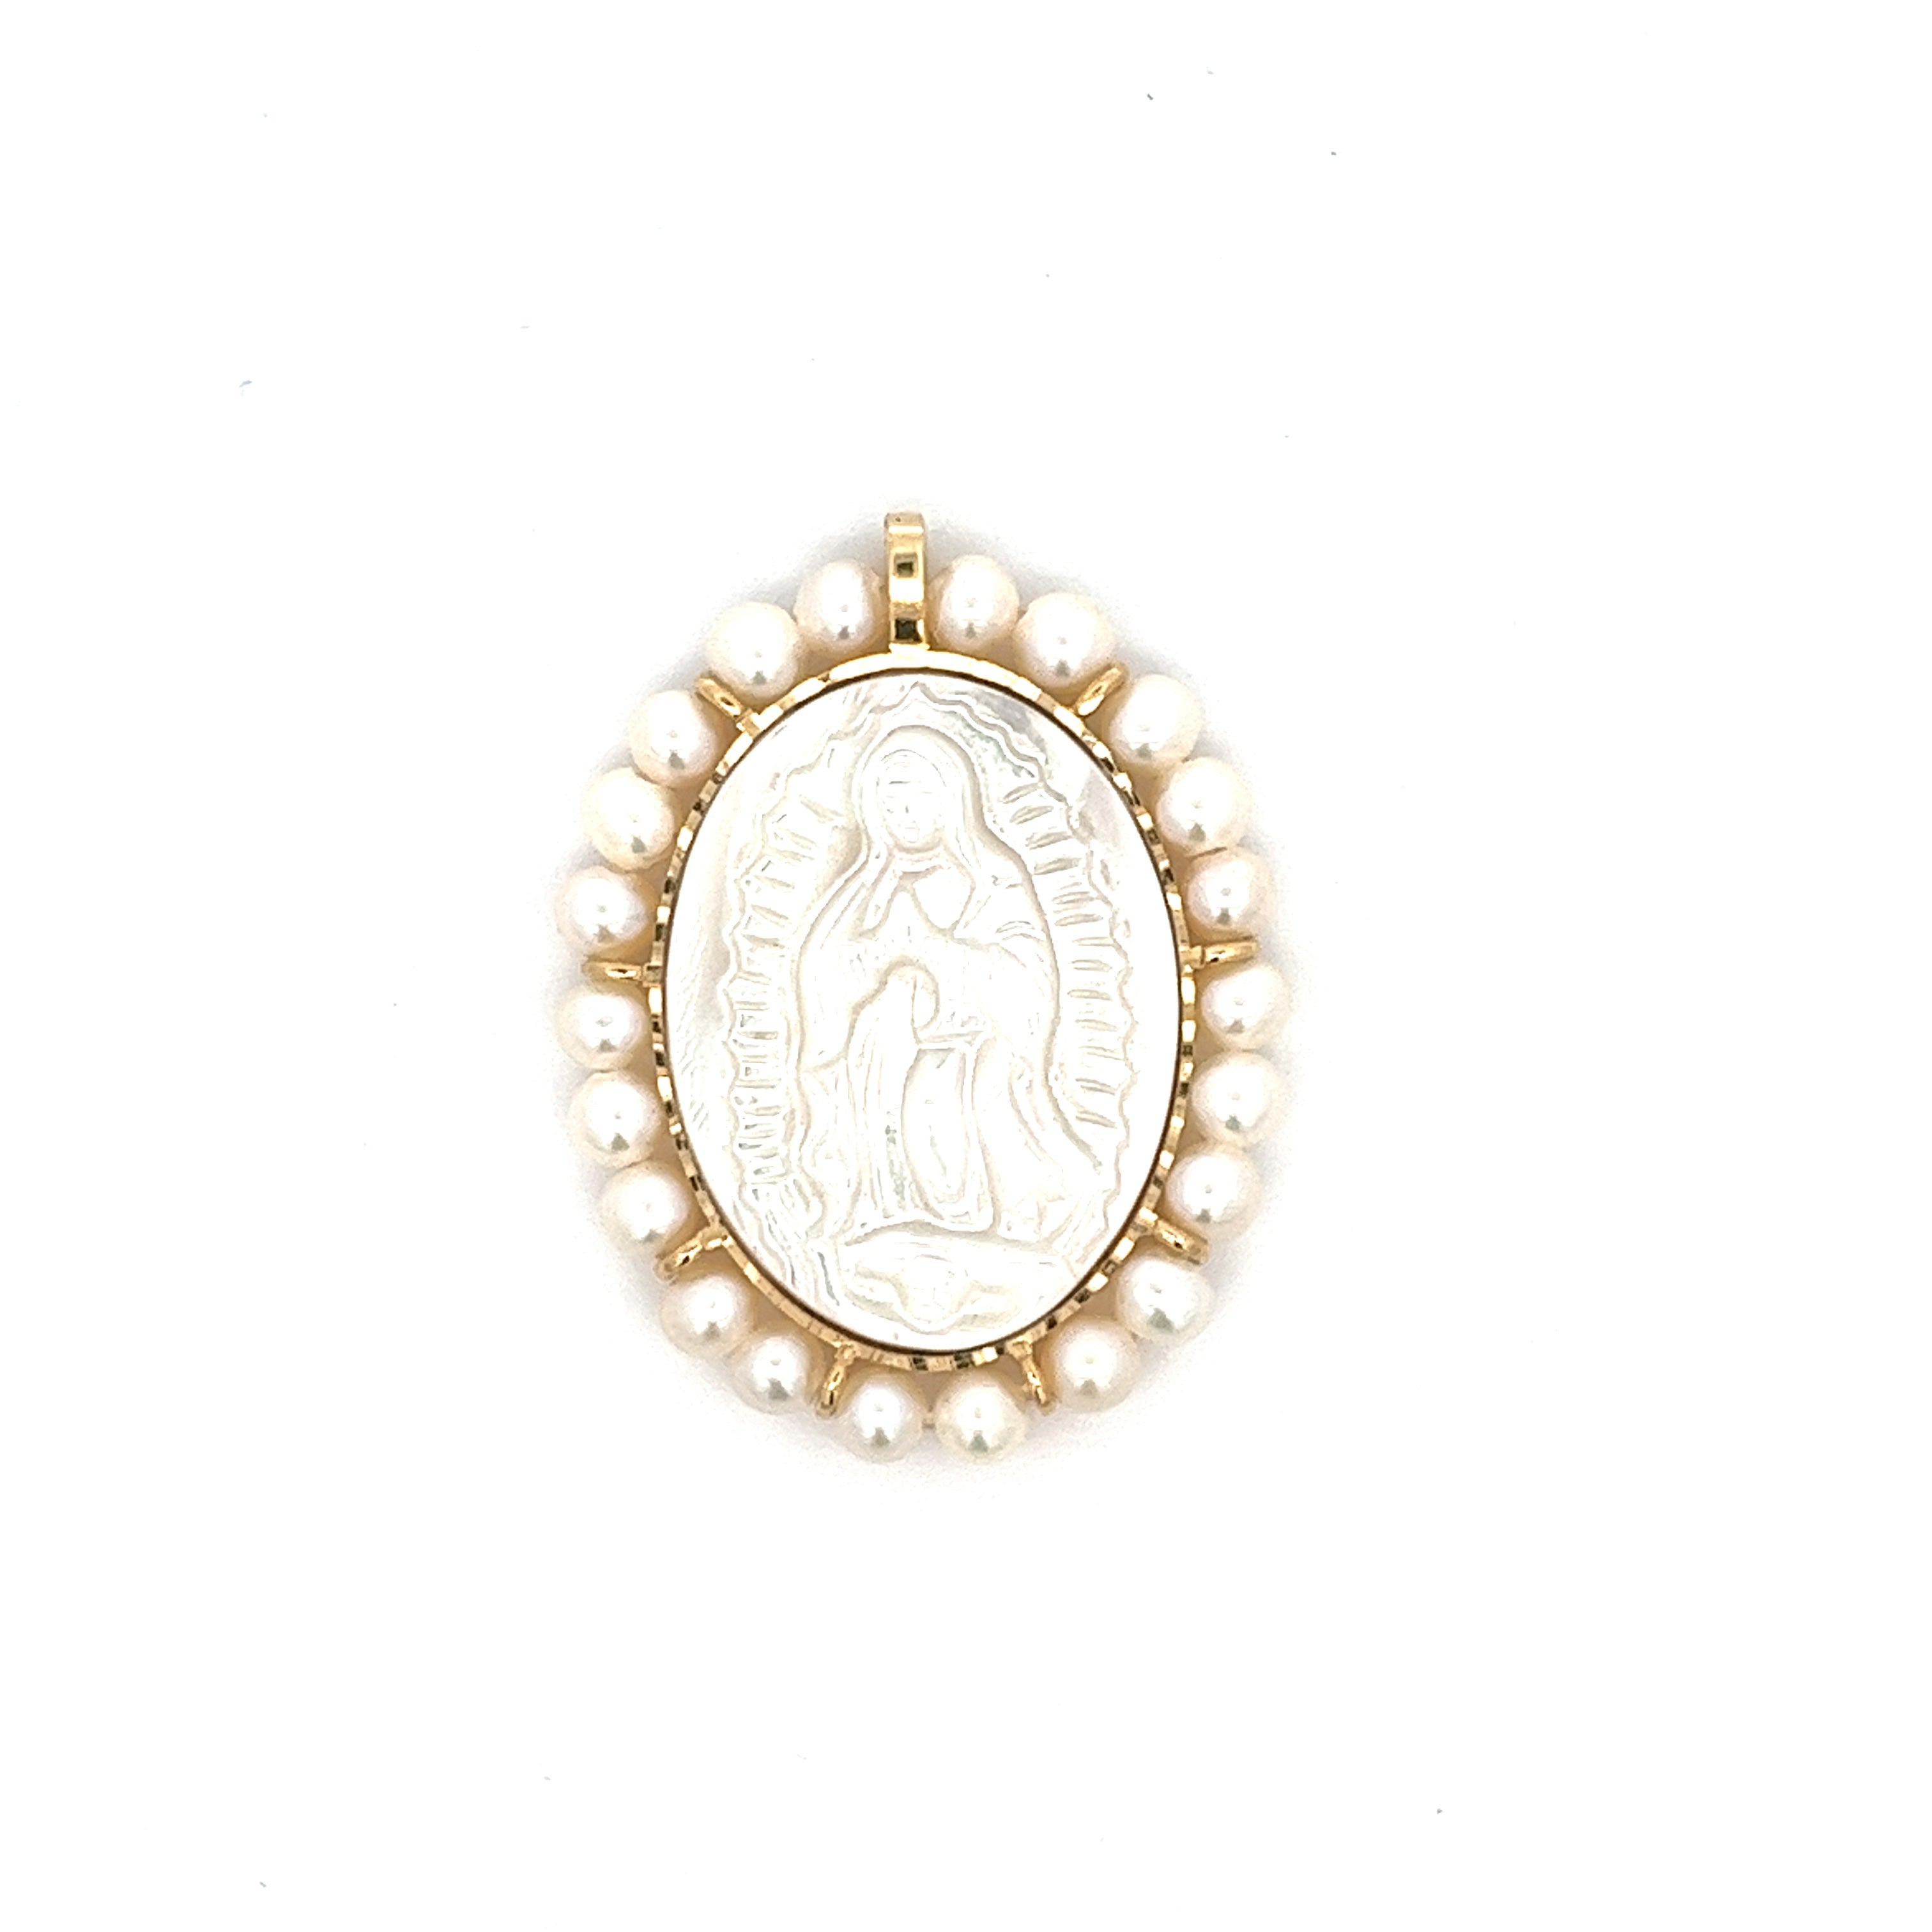 14K GOLD LADY OF GUADALUPE MEDAL IN MOTHER OF PEARL WITH HALO OF PEARLS